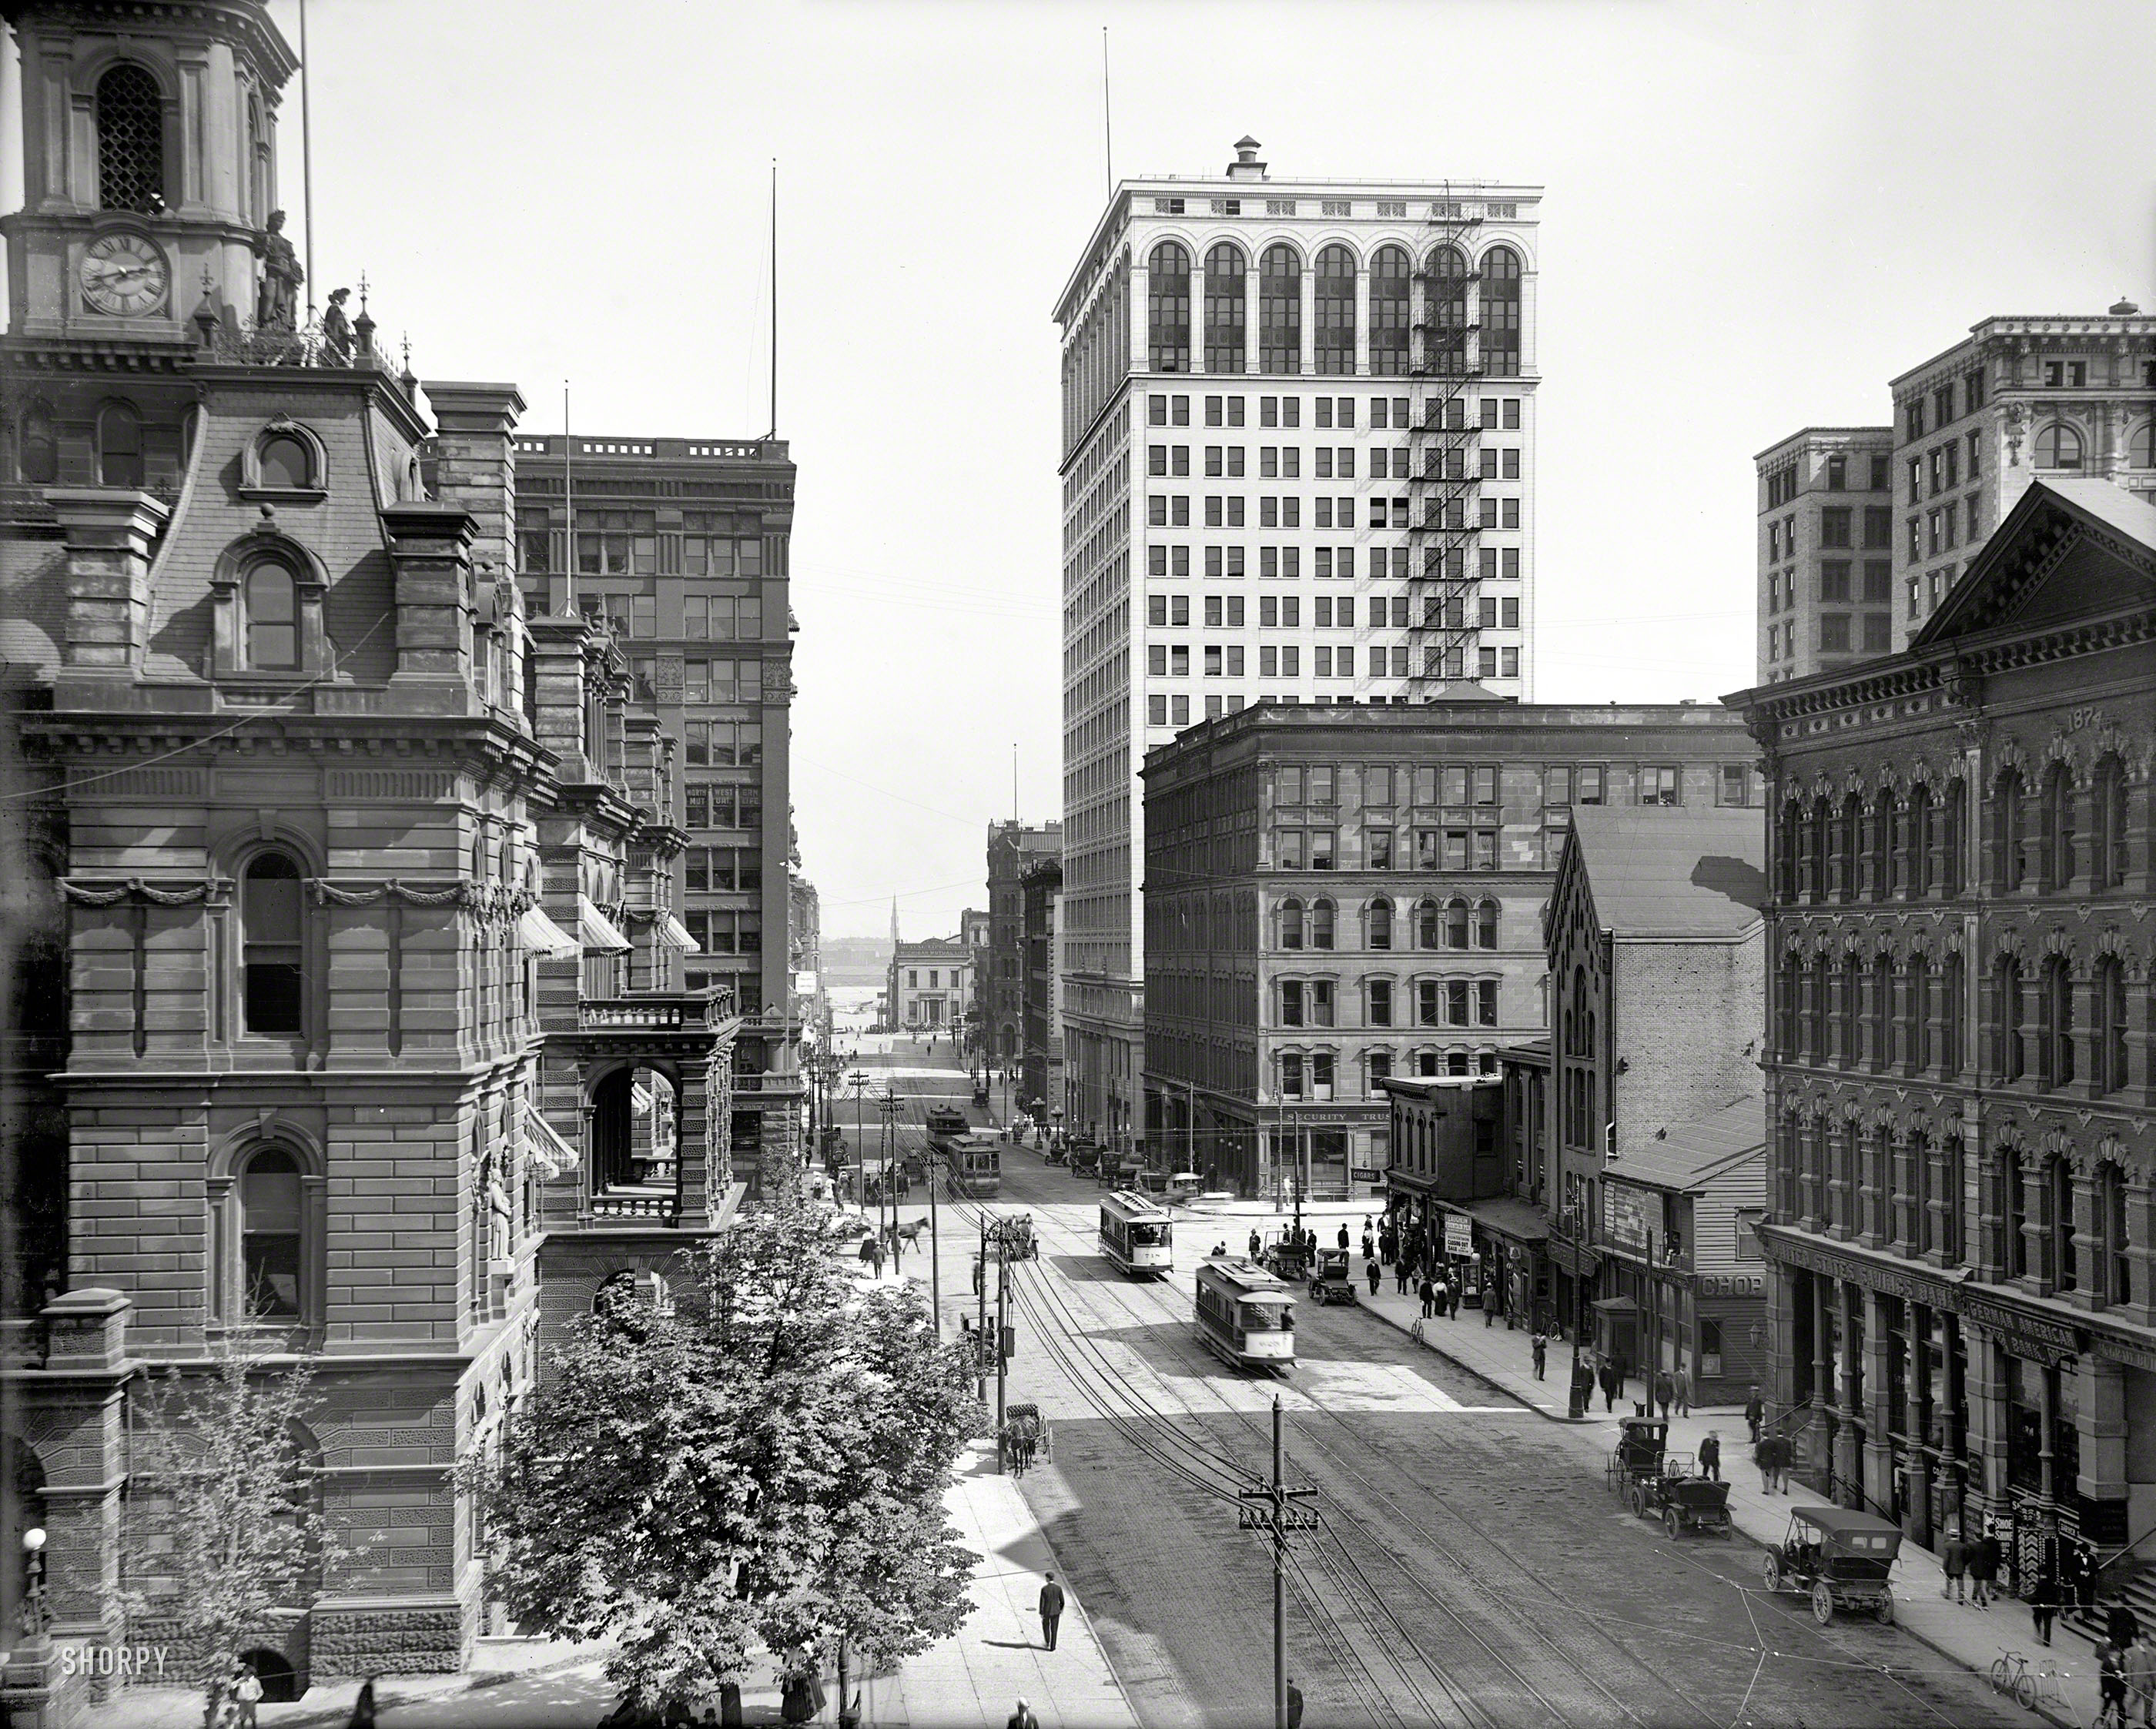 &nbsp; UPDATE: Note the baseball scoreboard on Sharpe's Chop House.
Detroit circa 1910. "Griswold Street south from Michigan Avenue." And a view of the recently completed Ford Building. 8x10 glass negative. View full size.